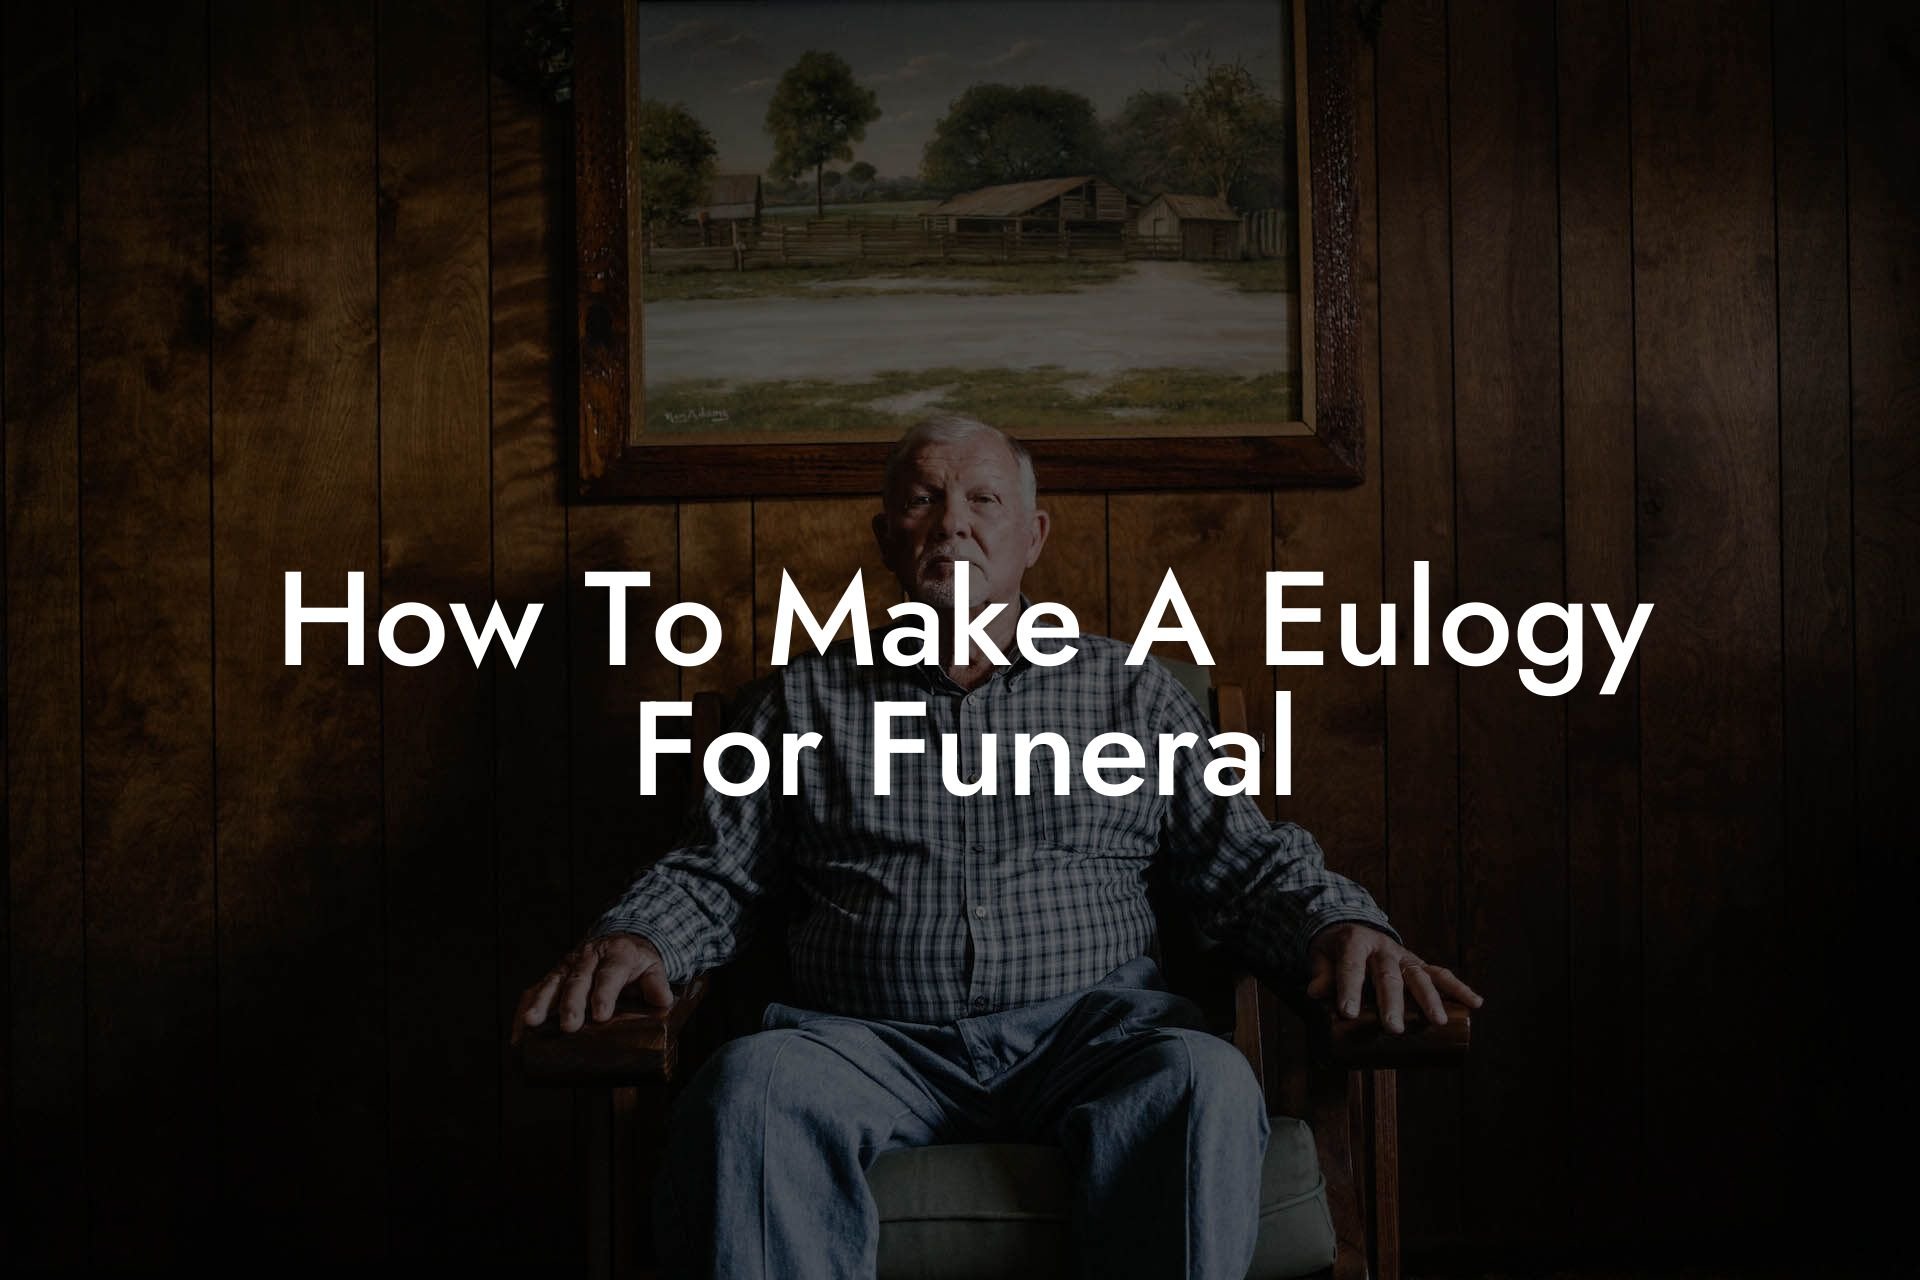 How To Make A Eulogy For Funeral